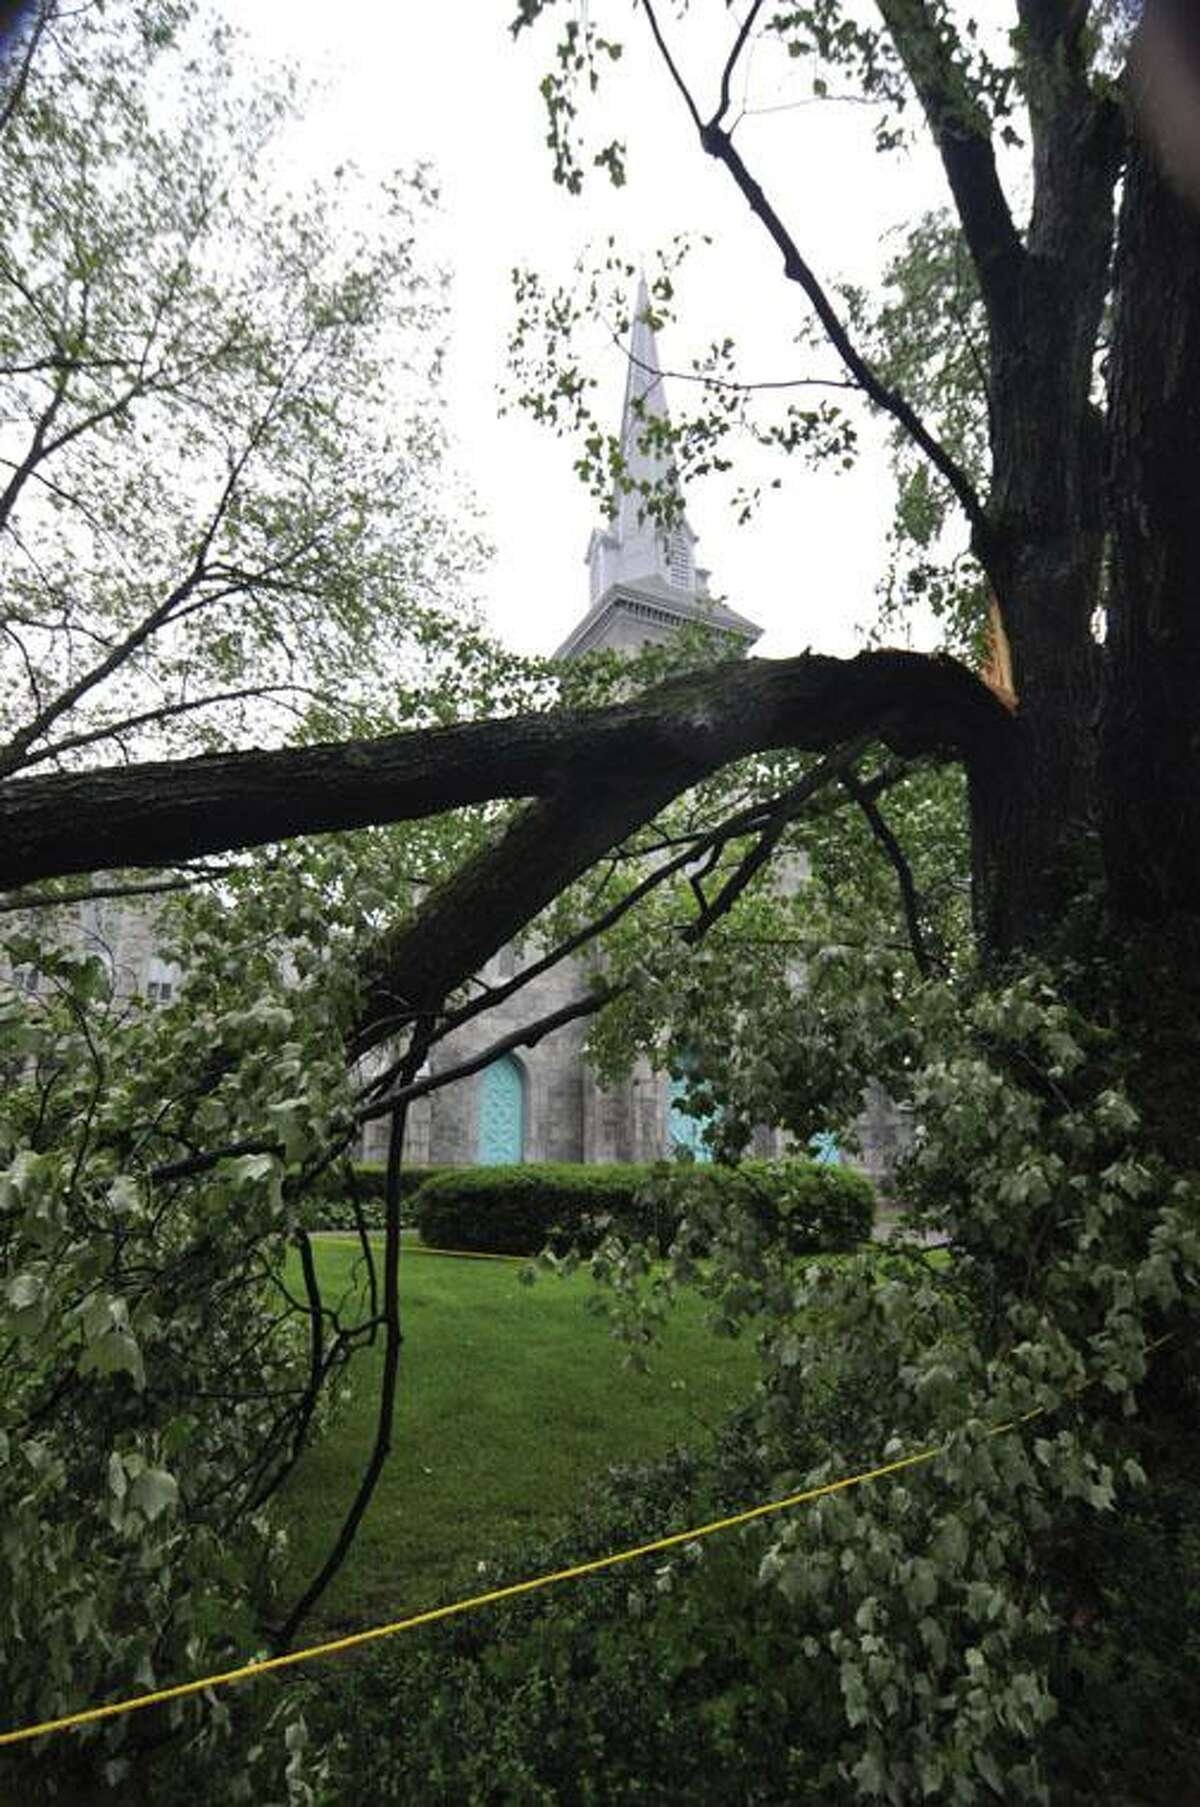 RICK THOMASON / Register CitizenBroken and battered trees sit as a reminder of the fury of Thursday afternoon's storms that blew through Torrington and much of Litchfield County. Two trees were broken on the grounds of Center Congregation Church on Main Street in Torrington.